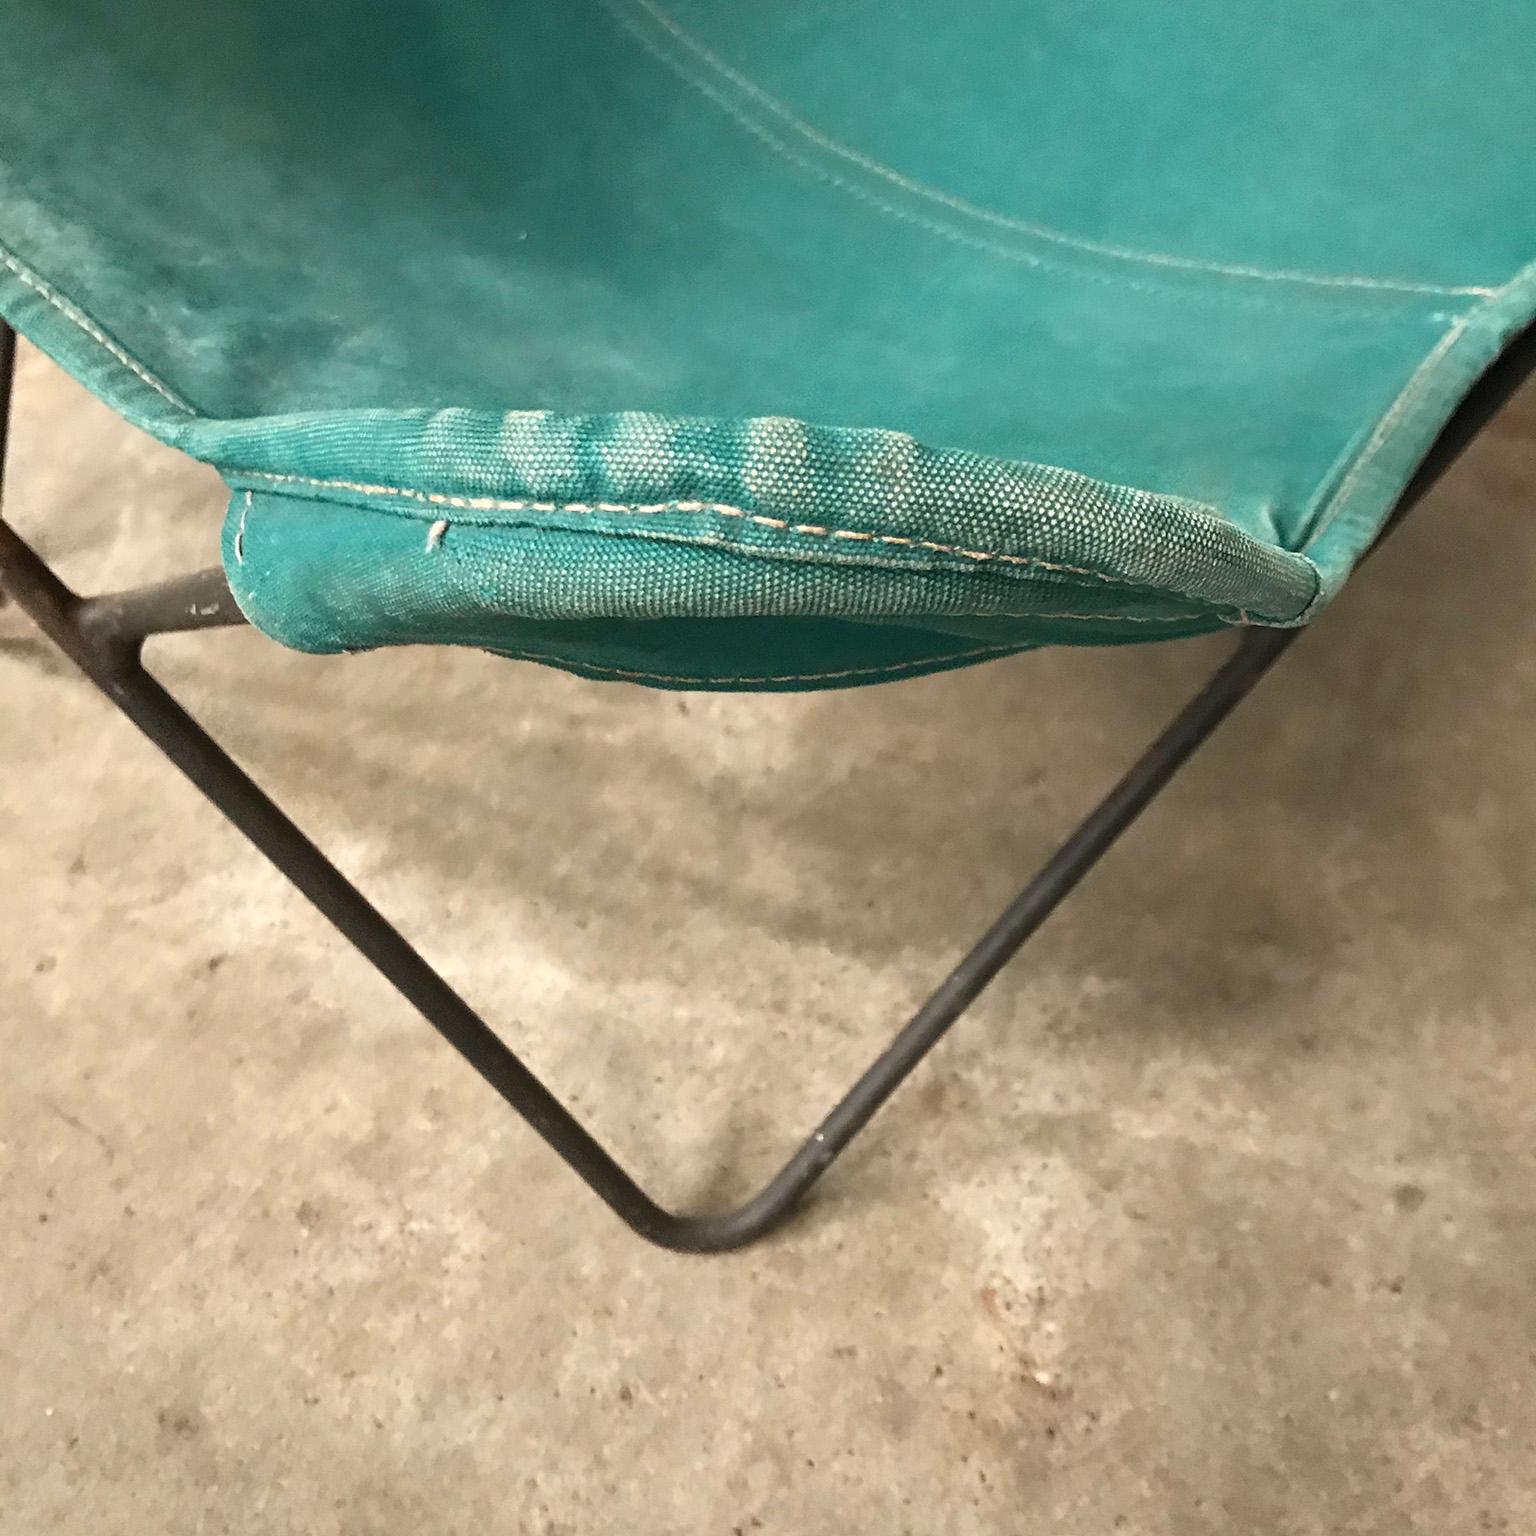 1947, Hardoy, Ferrari, Green Cover with Grey Base Butterfly Chair 9